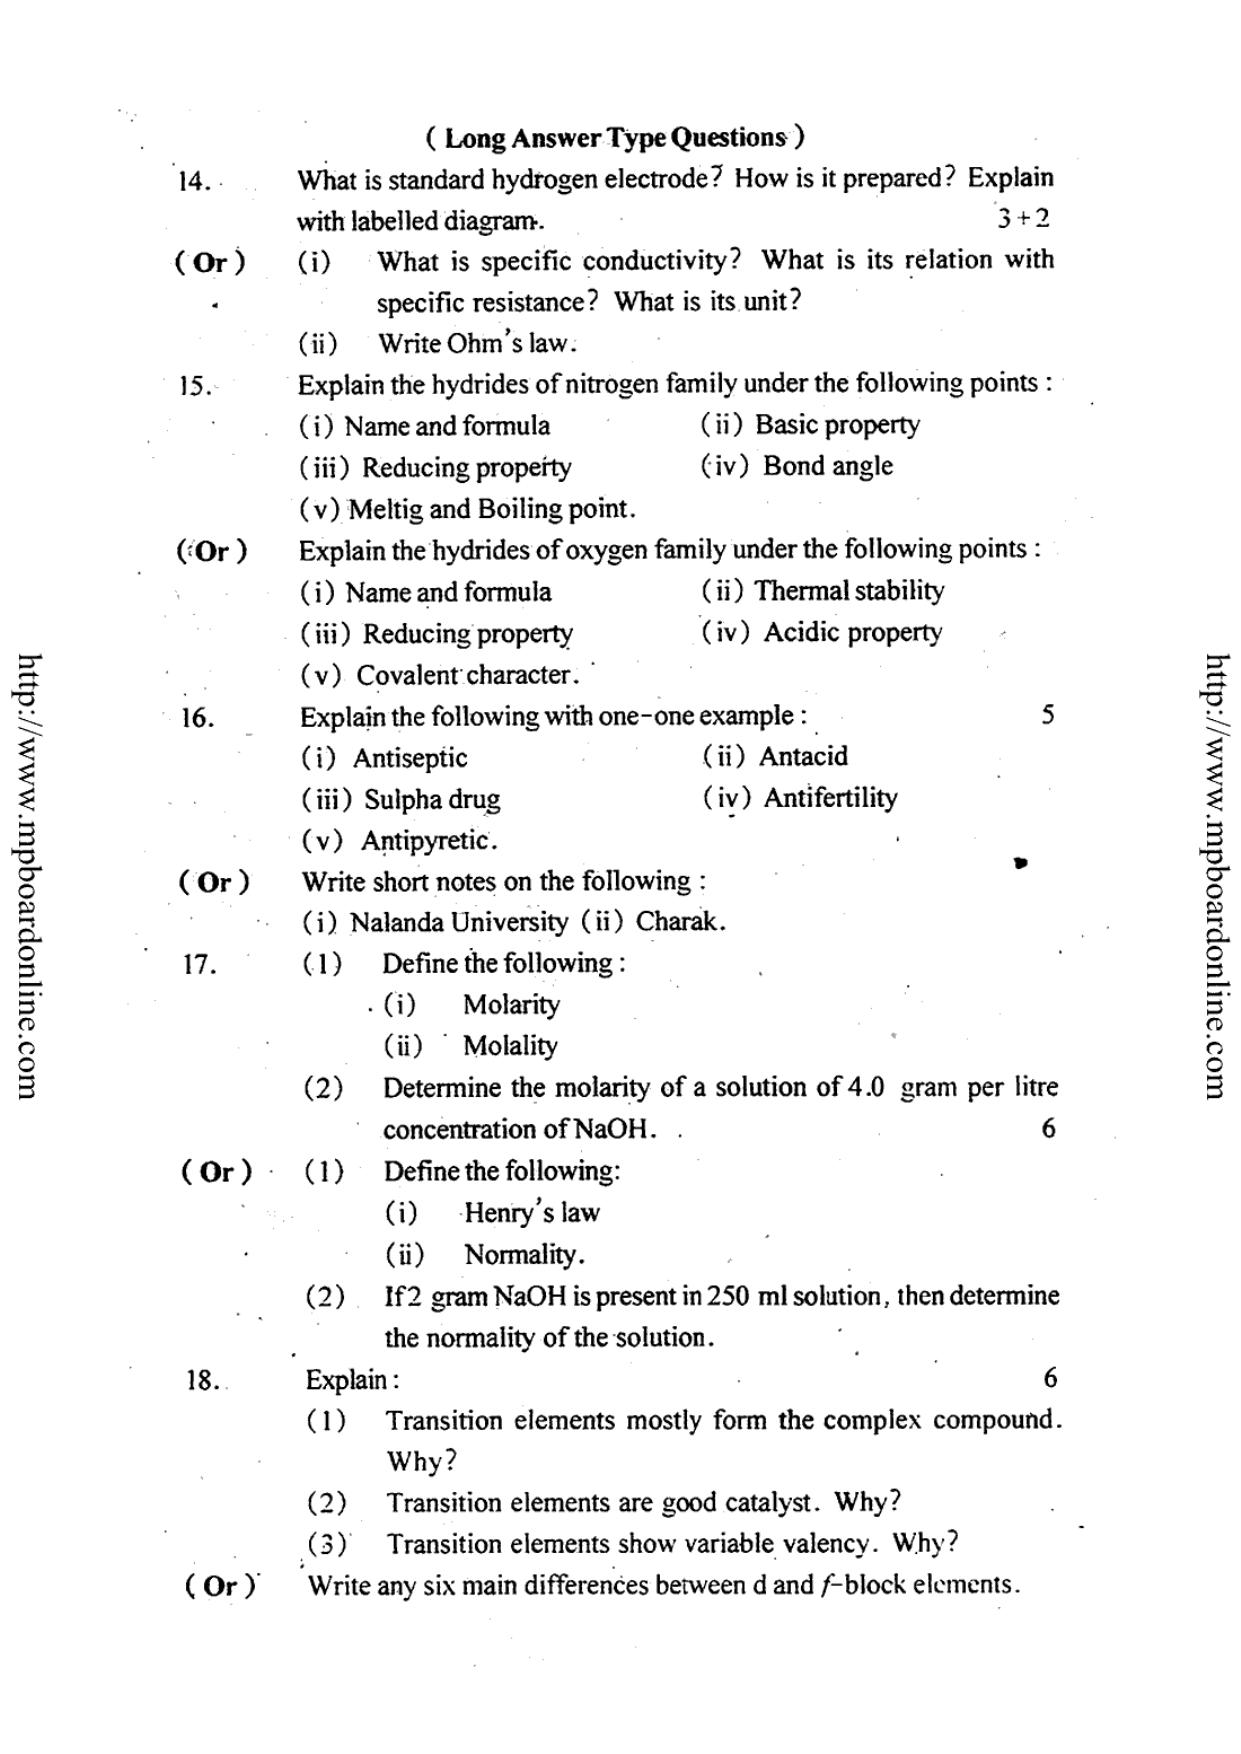 MP Board Class 12 Chemistry (English Medium) 2014 Question Paper - Page 4